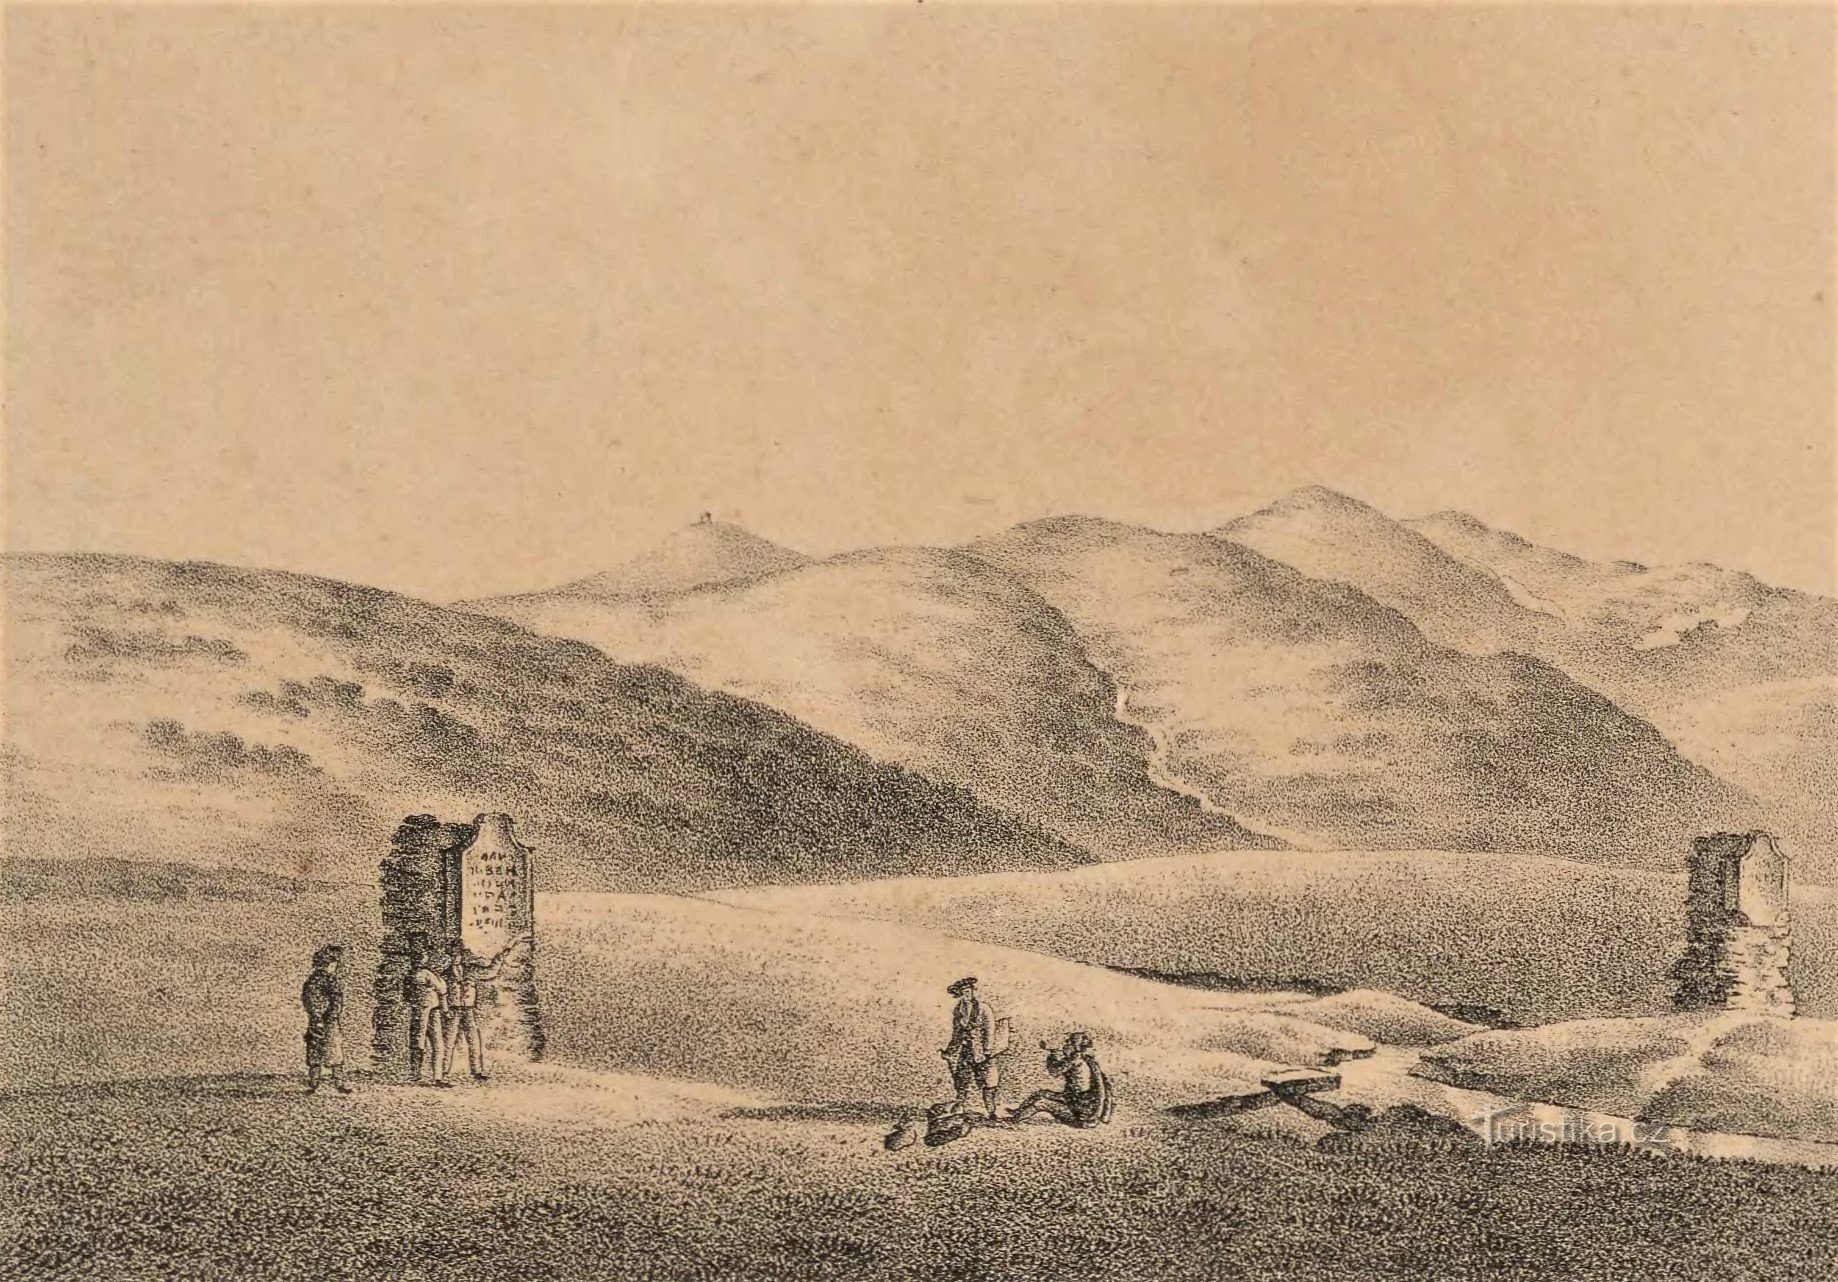 The source of the Elbe in an engraving by Carl Julius Rieden from the early 19th century